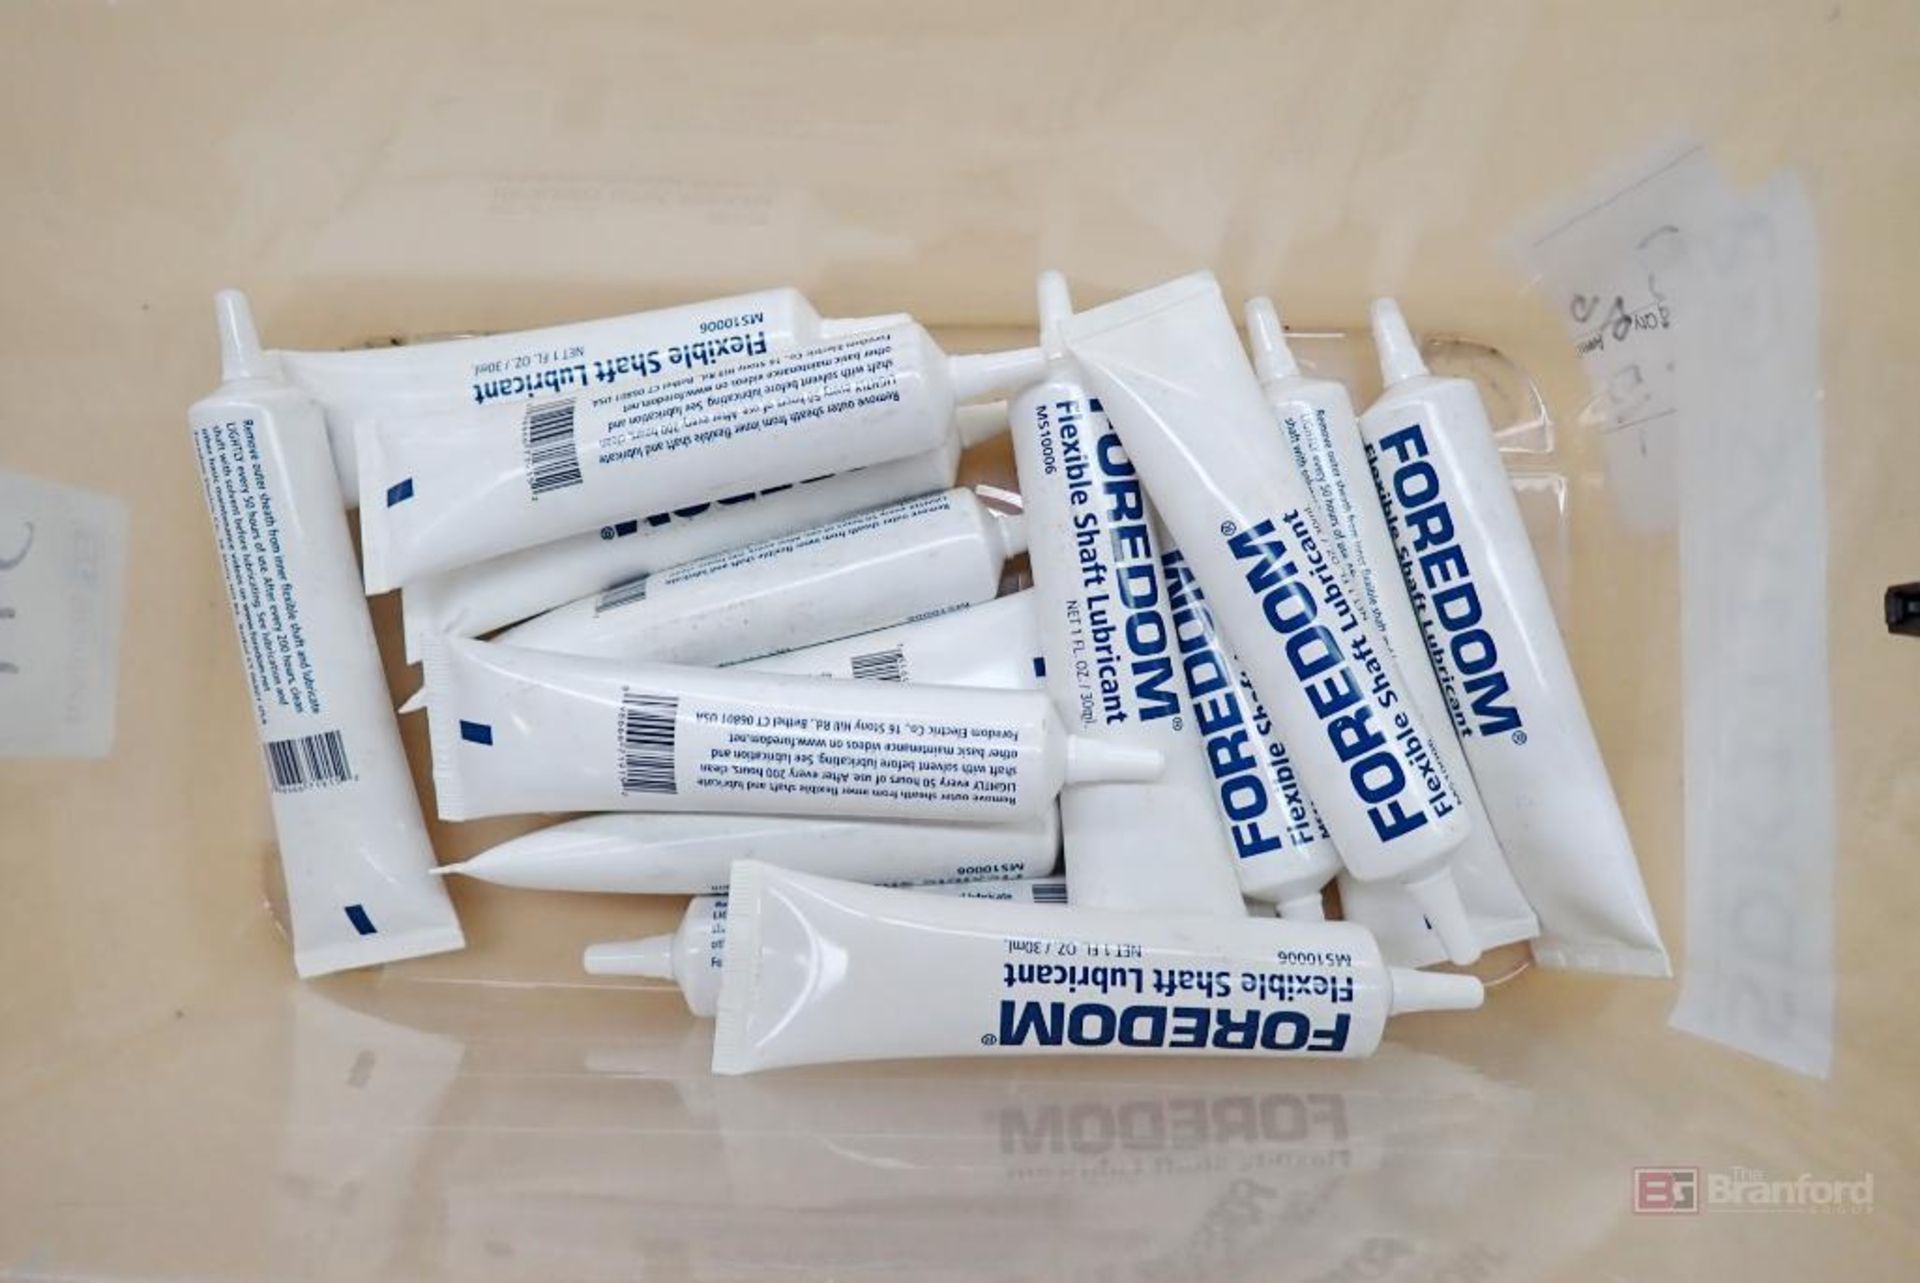 Box Lot of Foredom MS10006 Flexible Shaft Lubricant